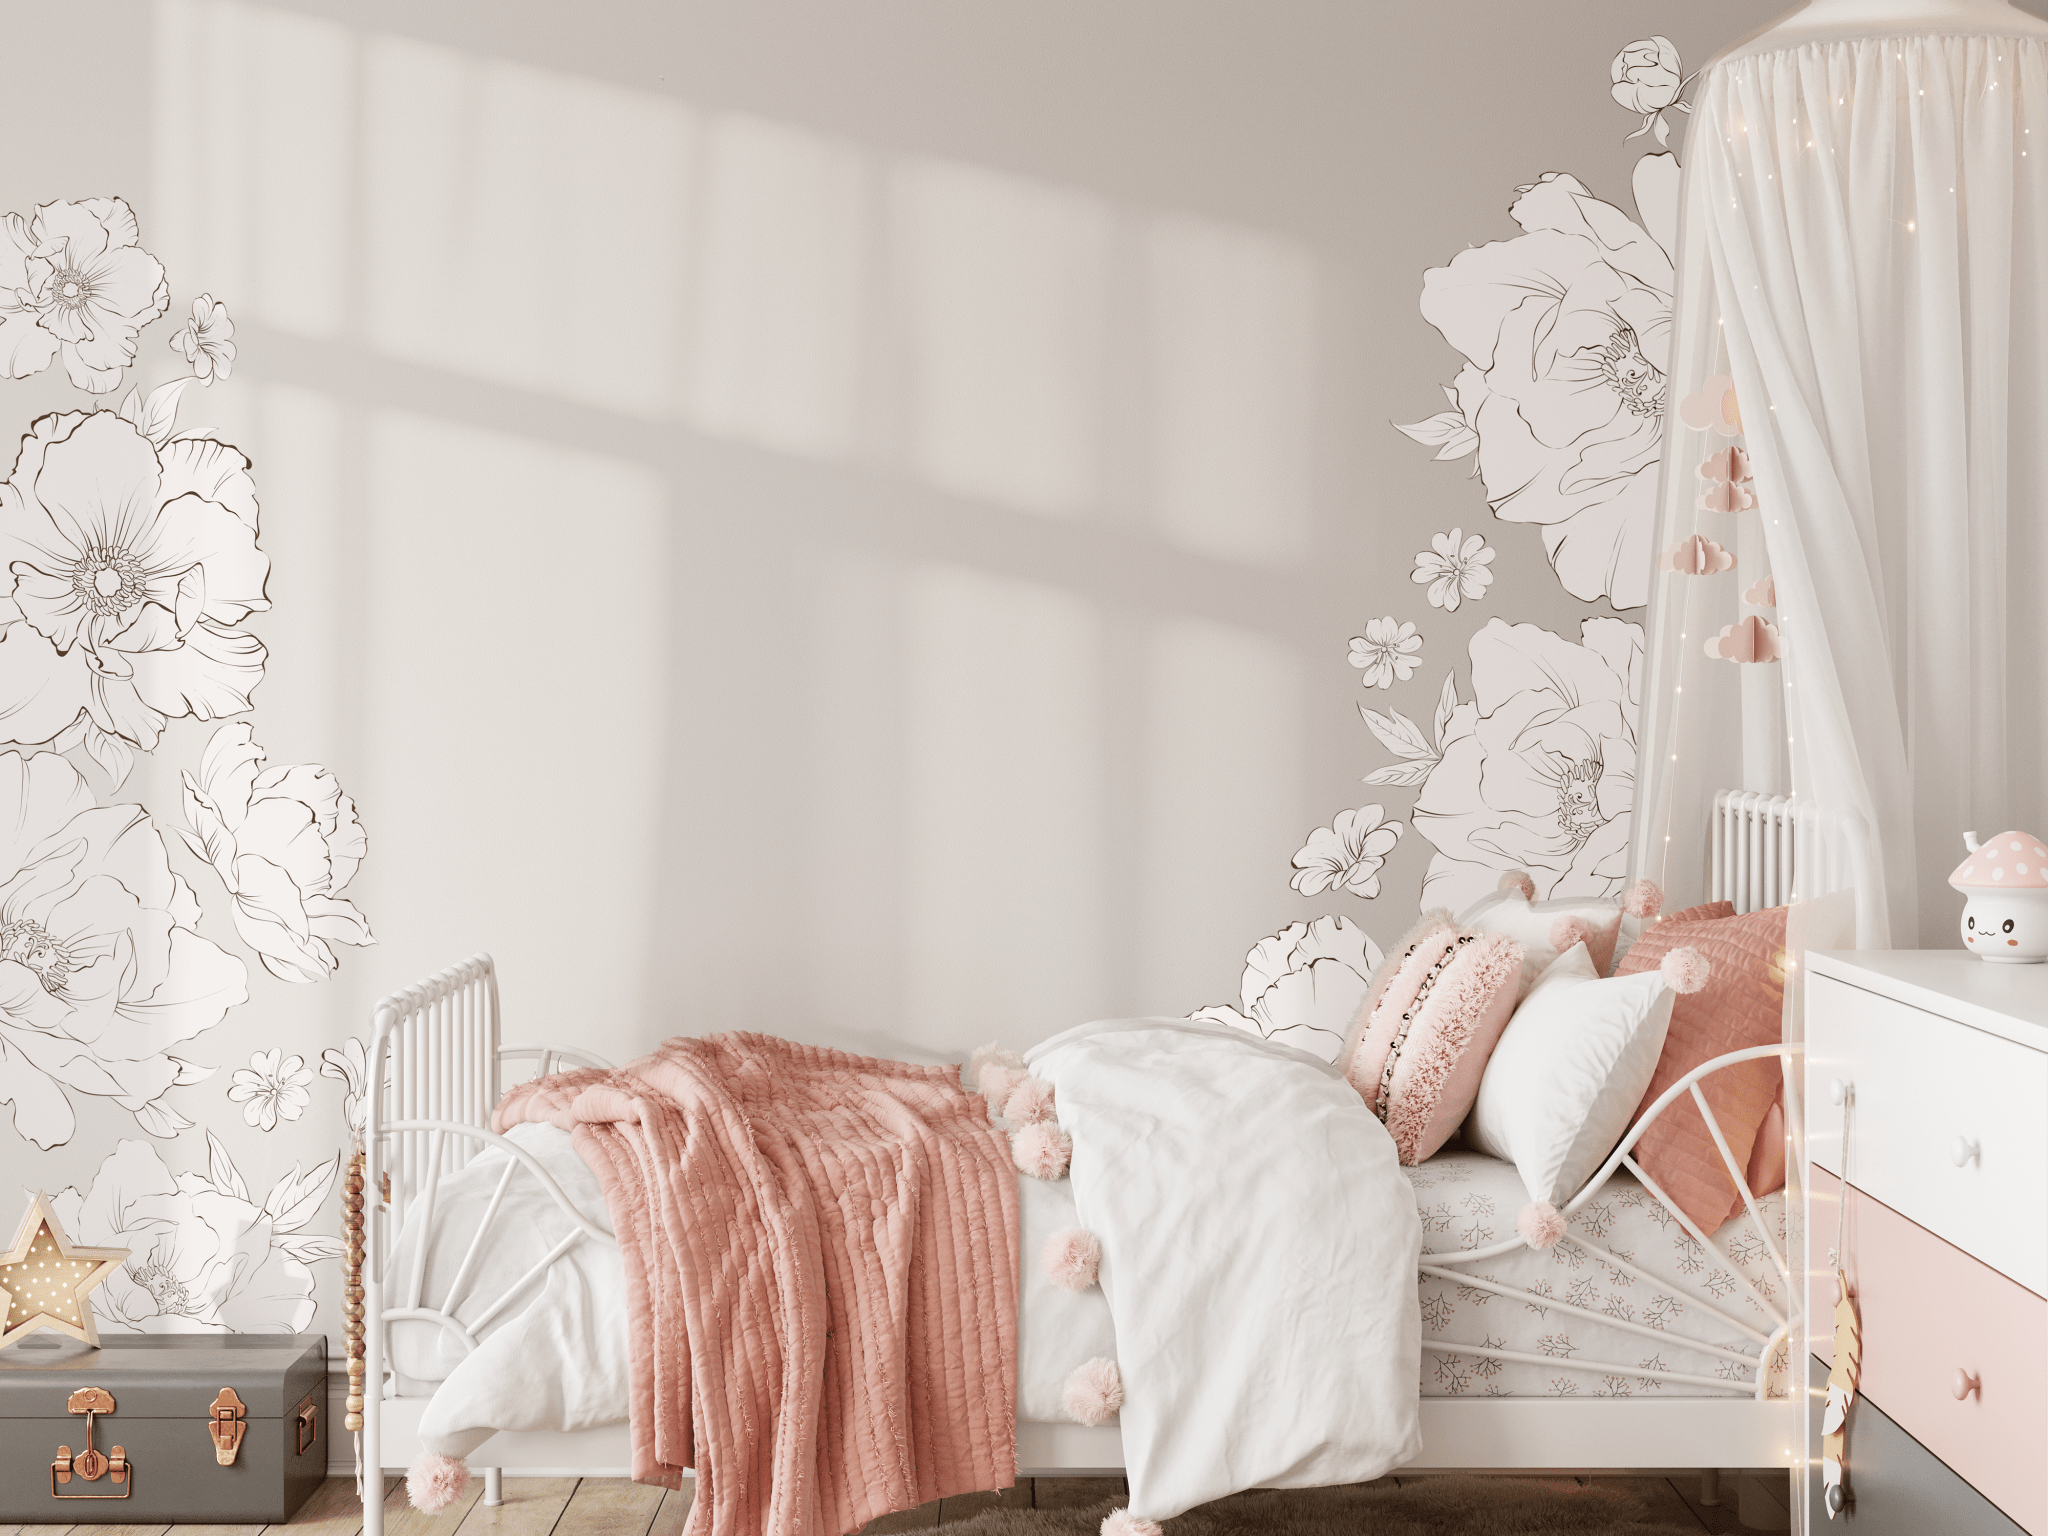 Girls' bedroom decorated with soft pink and white bedding, featuring large peony wall decals that create a whimsical and serene atmosphere. The floral decals add a charming touch to the cozy, dreamy room